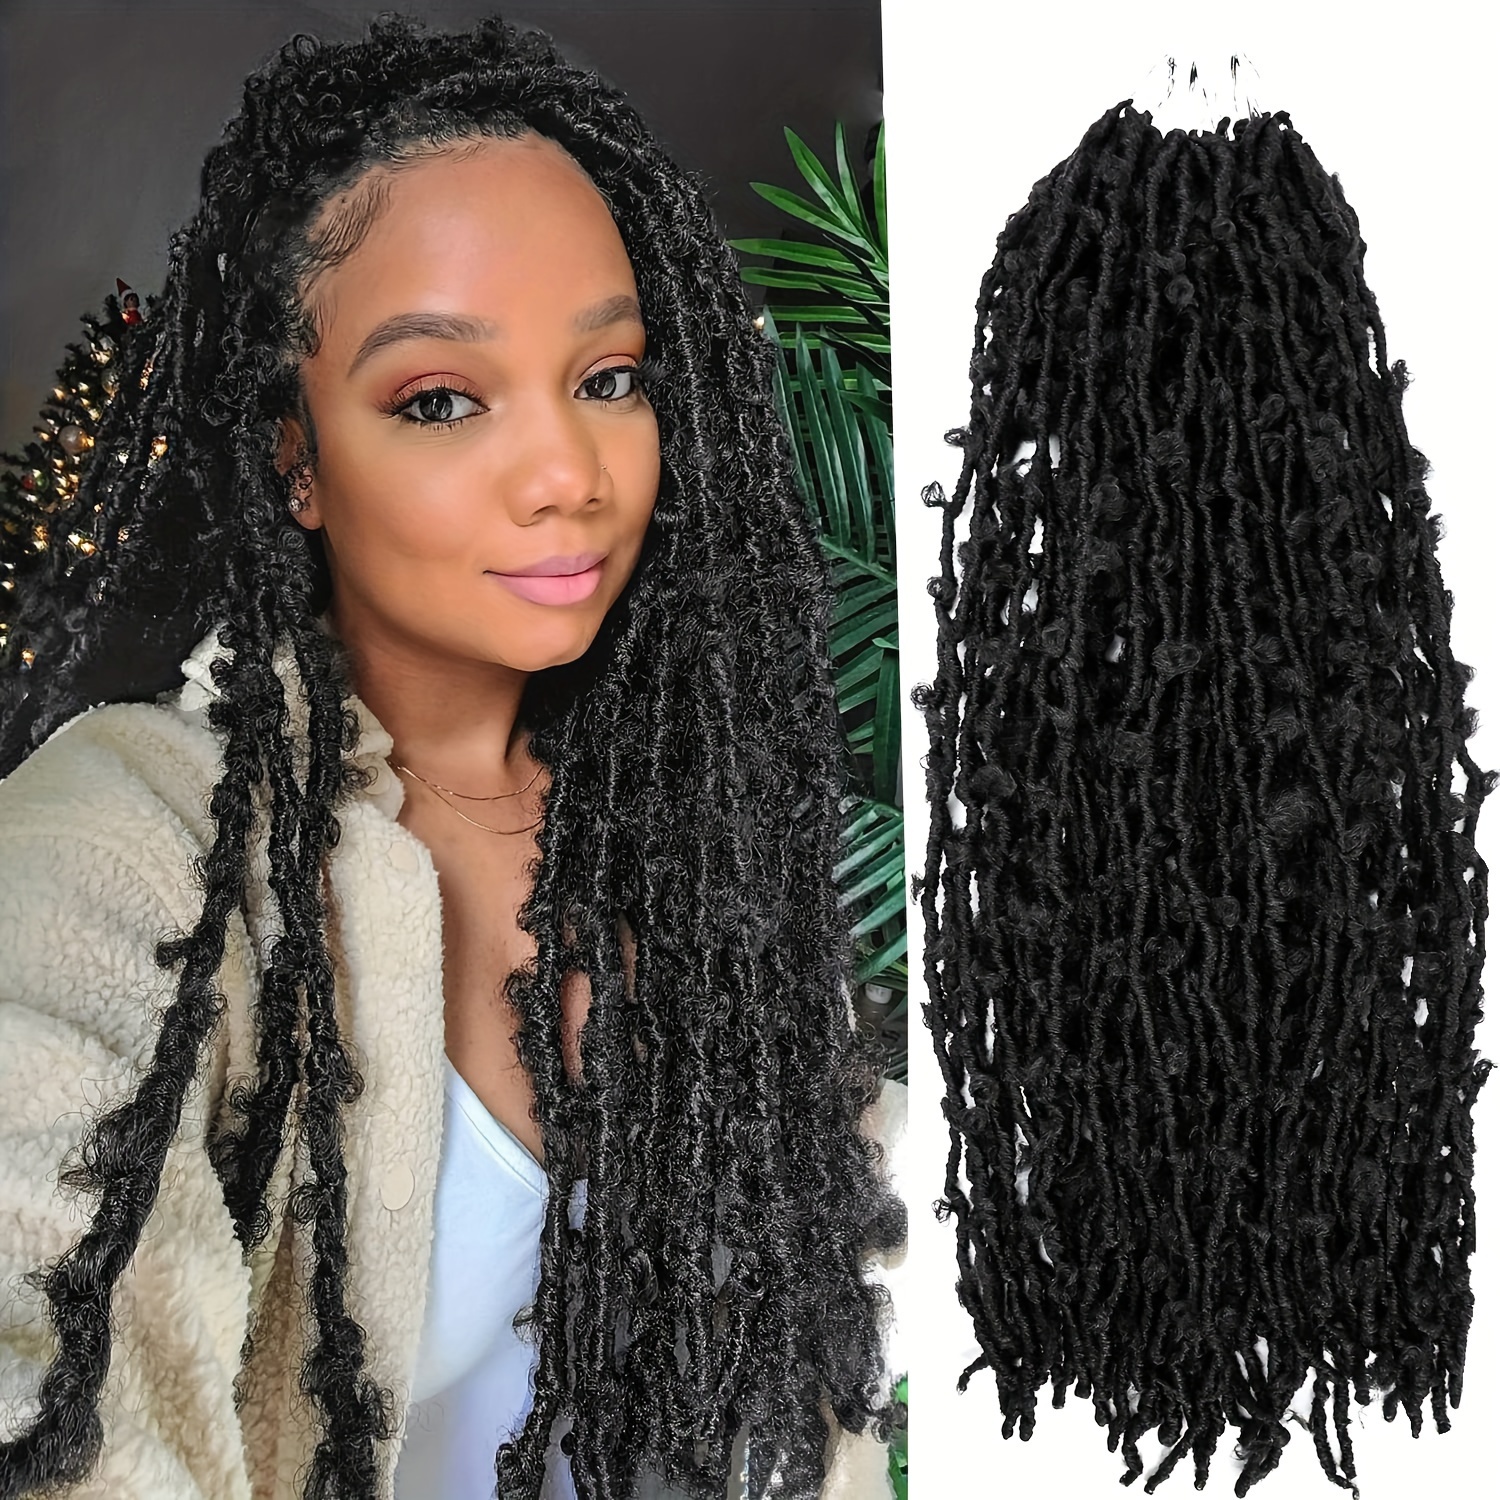  FANCEE Faux Locs Crochet Hair 8 Inches Short Curly Dreadlocks  Extensions for Black Women Pre Looped Soft Nu Locs Ombre Brown Wavy Crochet  Dreads Braiding in Hair Extensions(6 Packs 120